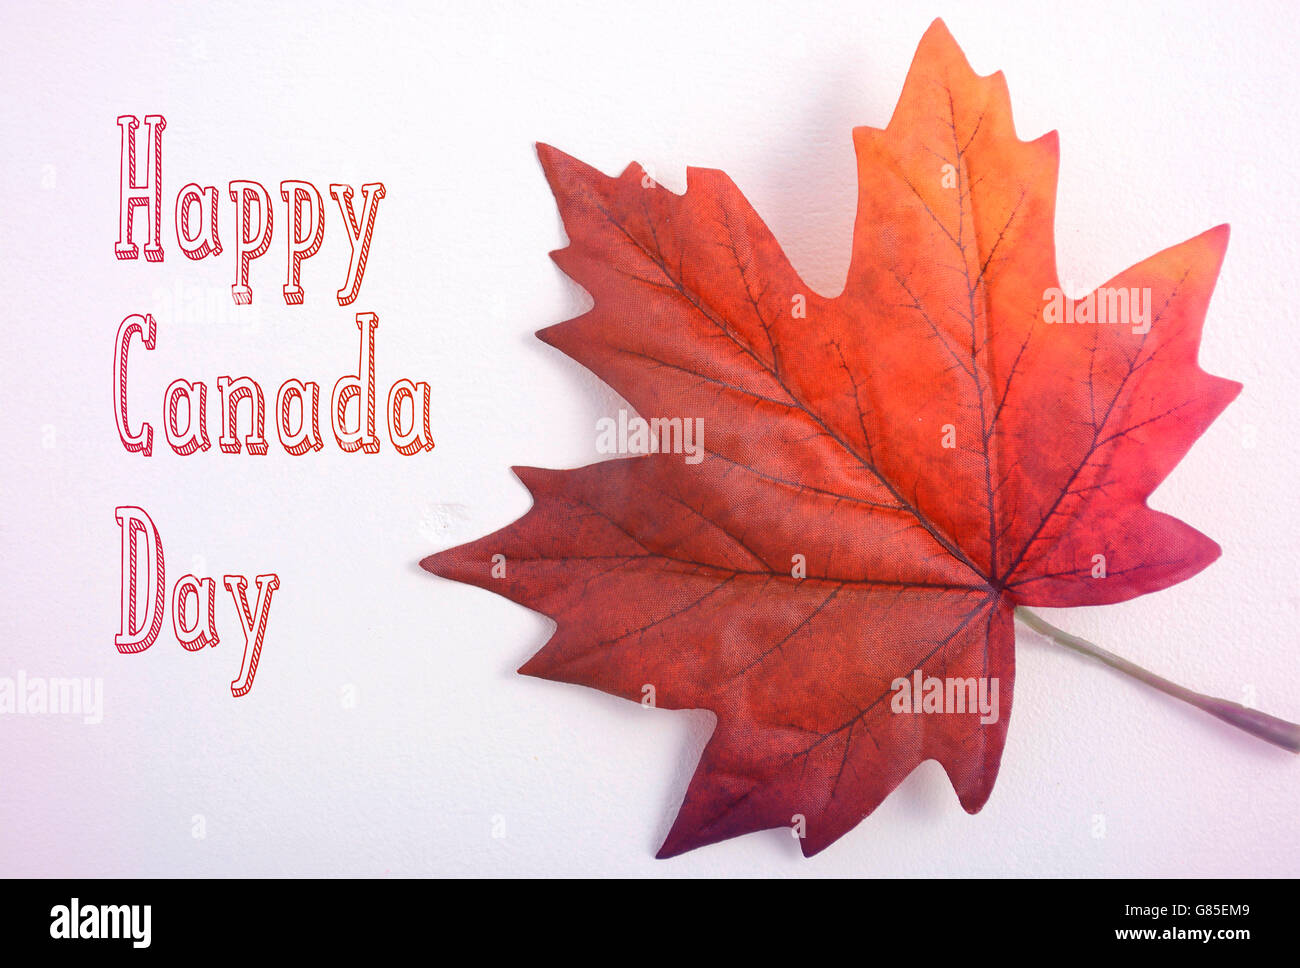 Happy Canada Day symbolic maple leaf on a white wood table with added light leak filters and on-trend handdrawn text. Stock Photo